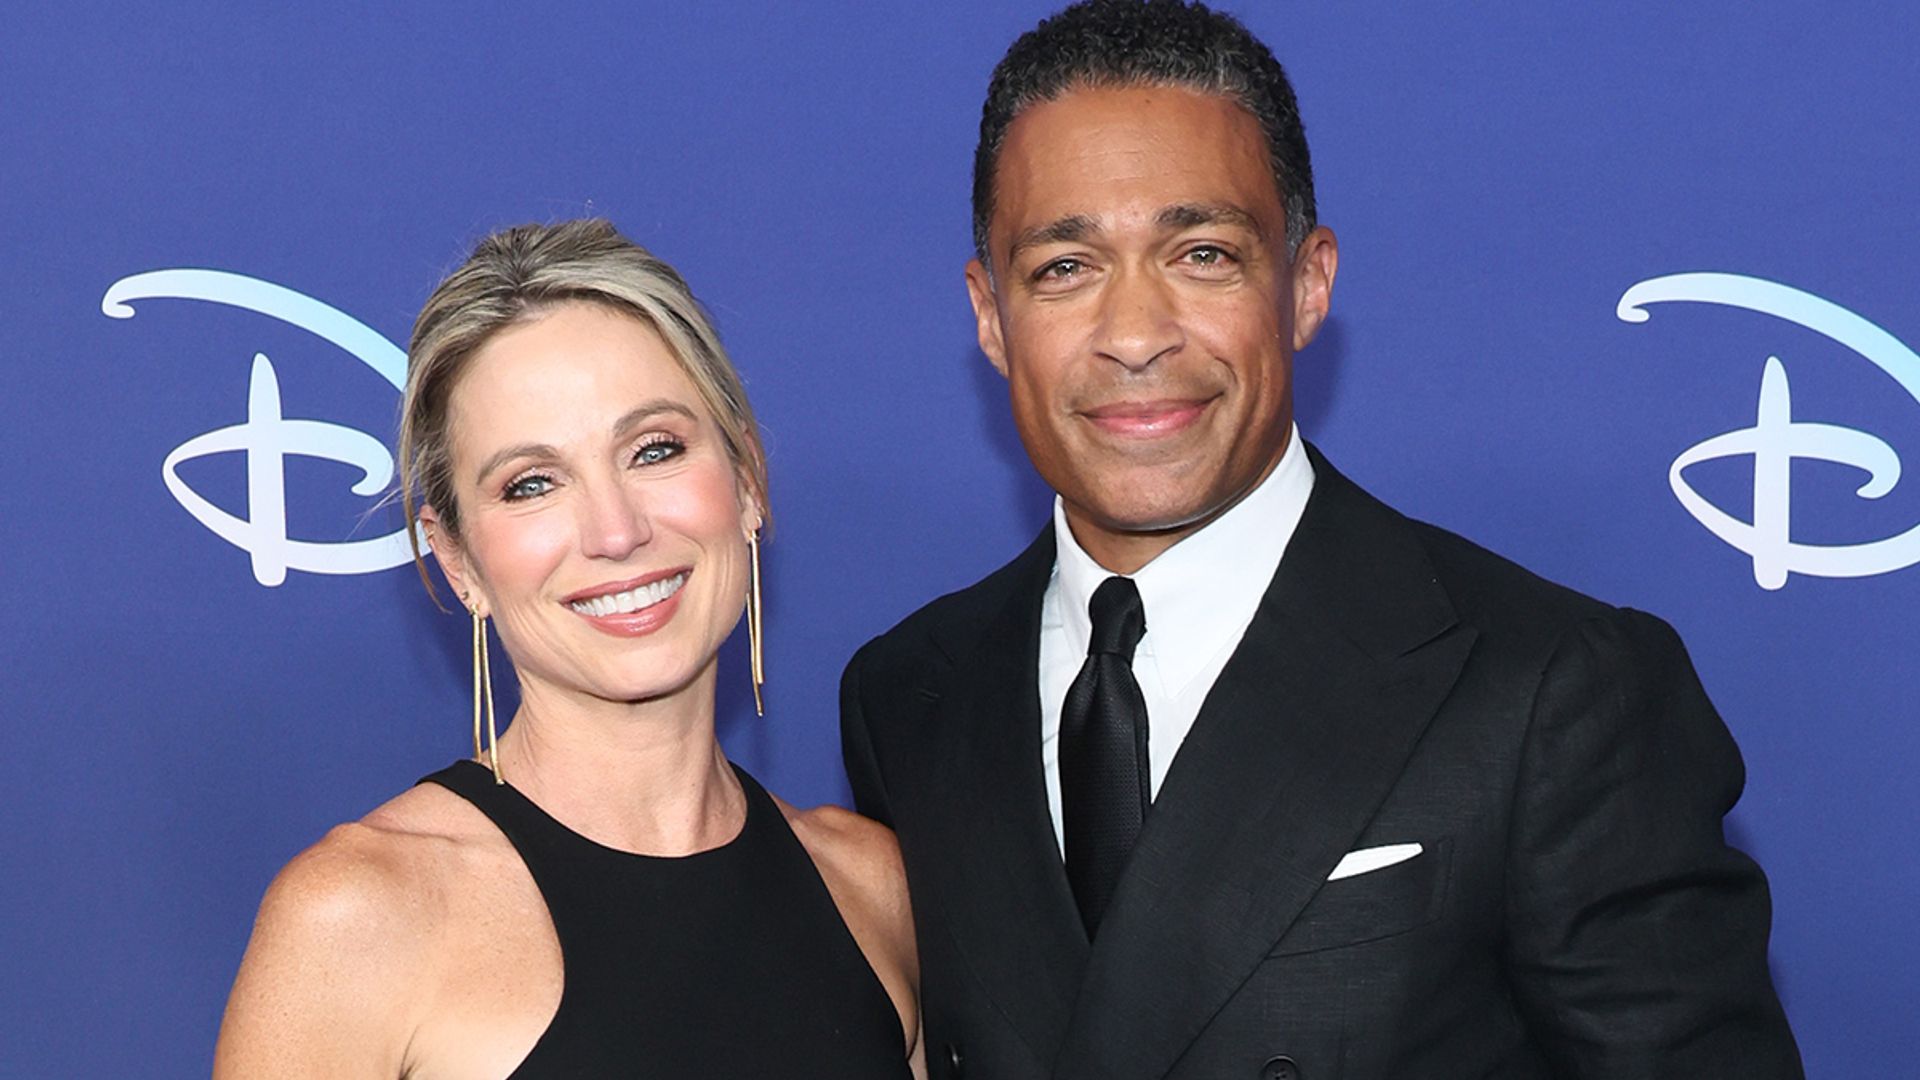 Amy Robach And T J Holmes Why February Is An Important Month For The